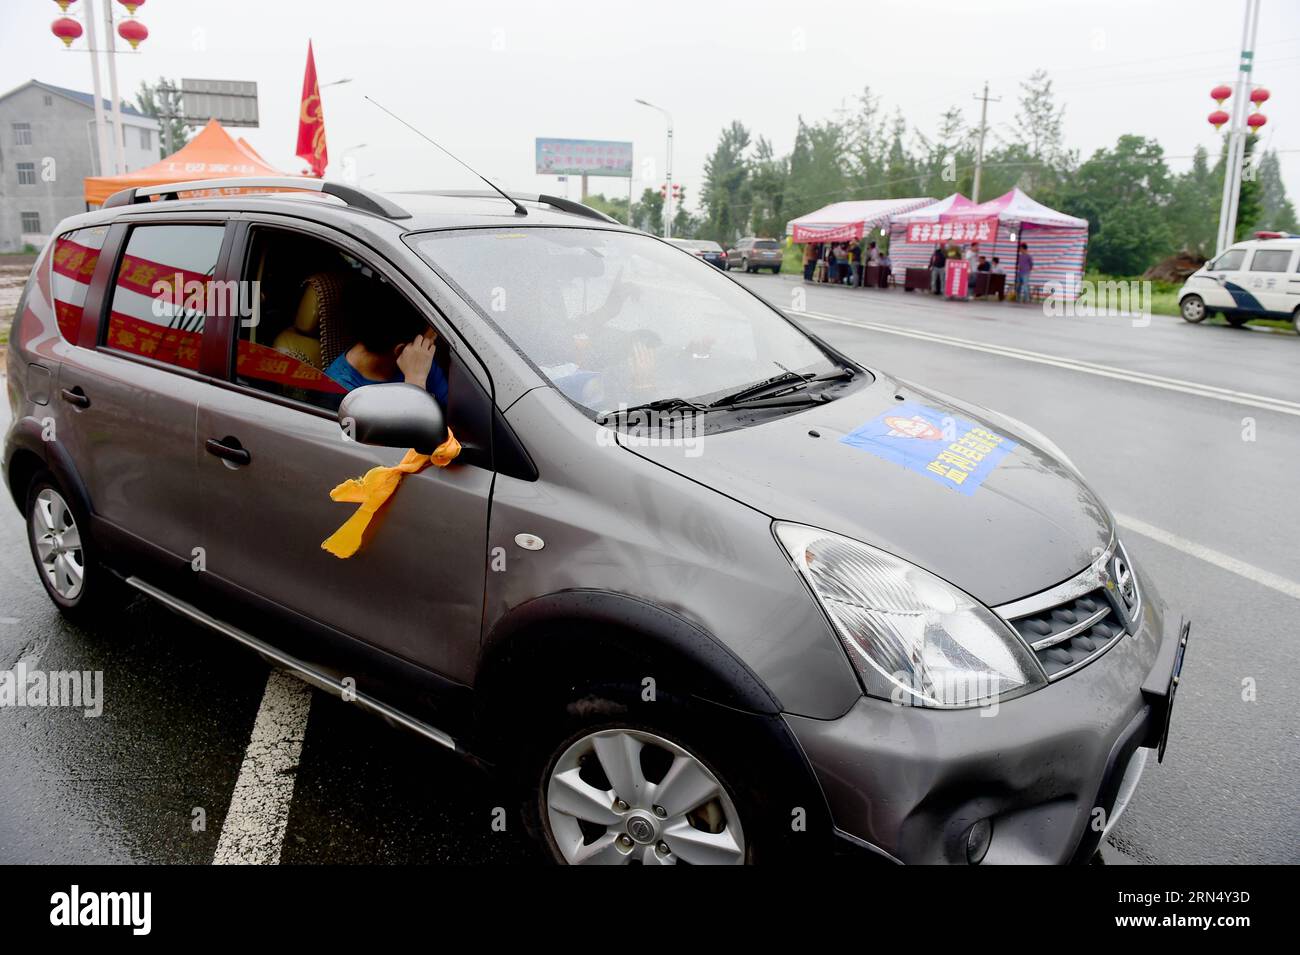 (150604) -- JIANLI, June 4, 2015 -- A car drives on a street with yellow ribbons tied to the rearview mirrors in Jianli, central China s Hubei Province, June 4, 2015. A cruise ship carrying more than 450 people on Monday sank in the Jianli section of the Yangtze River. Many local drivers are joining the rescue effort by offering free rides for rescuers and relatives of victims with the sign of yellow ribbons. ) (wf) CHINA-HUBEI-SHIP SINKING-RESCUE (CN) HaoxTongqian PUBLICATIONxNOTxINxCHN   Jianli June 4 2015 a Car Drives ON a Street With Yellow ribbons Tied to The rearview mirrors in Jianli Ce Stock Photo